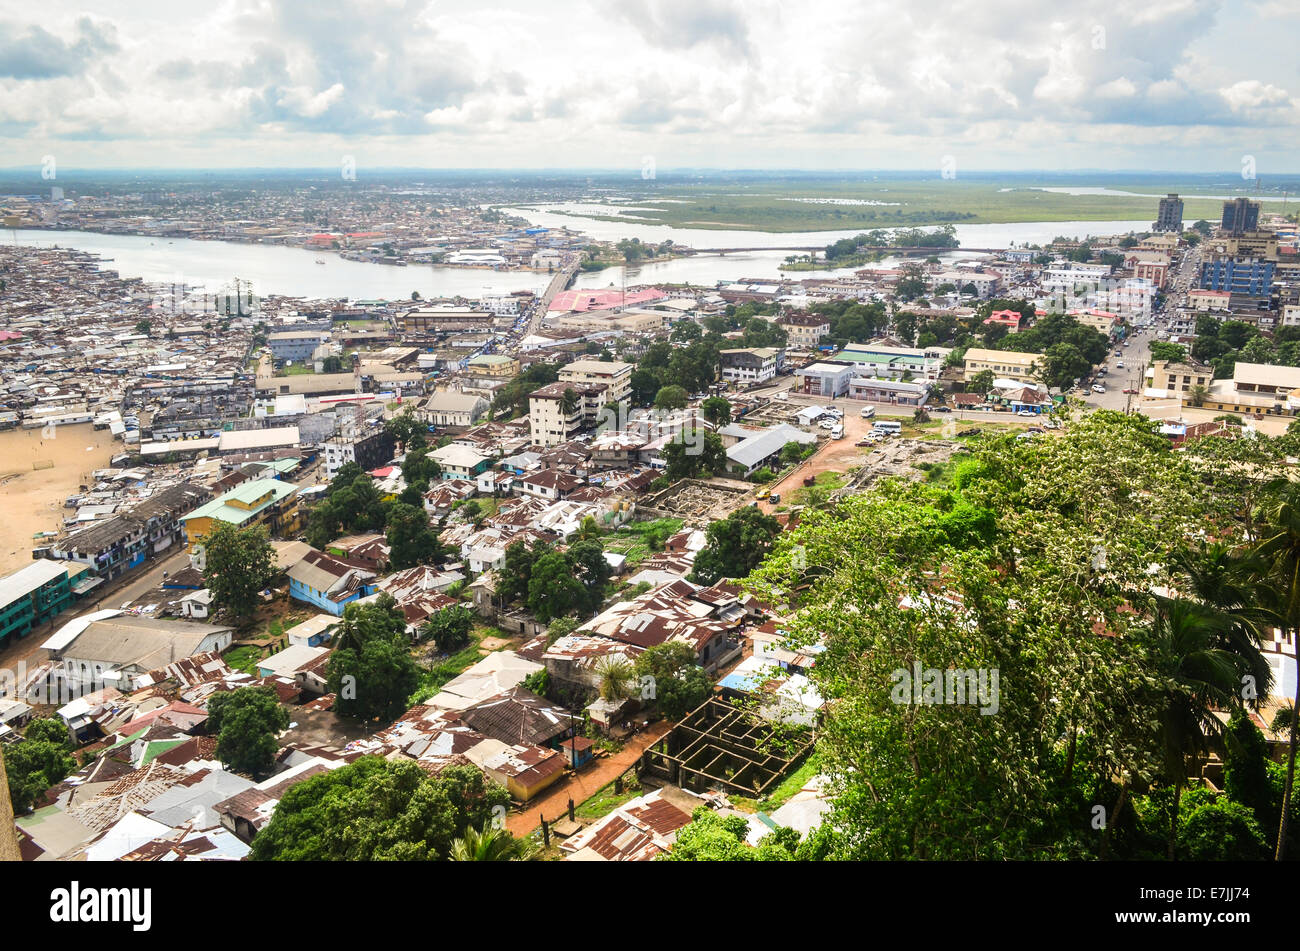 Aerial view of the city of Monrovia, Liberia, taken from the top of the ruins of Hotel Ducor Stock Photo